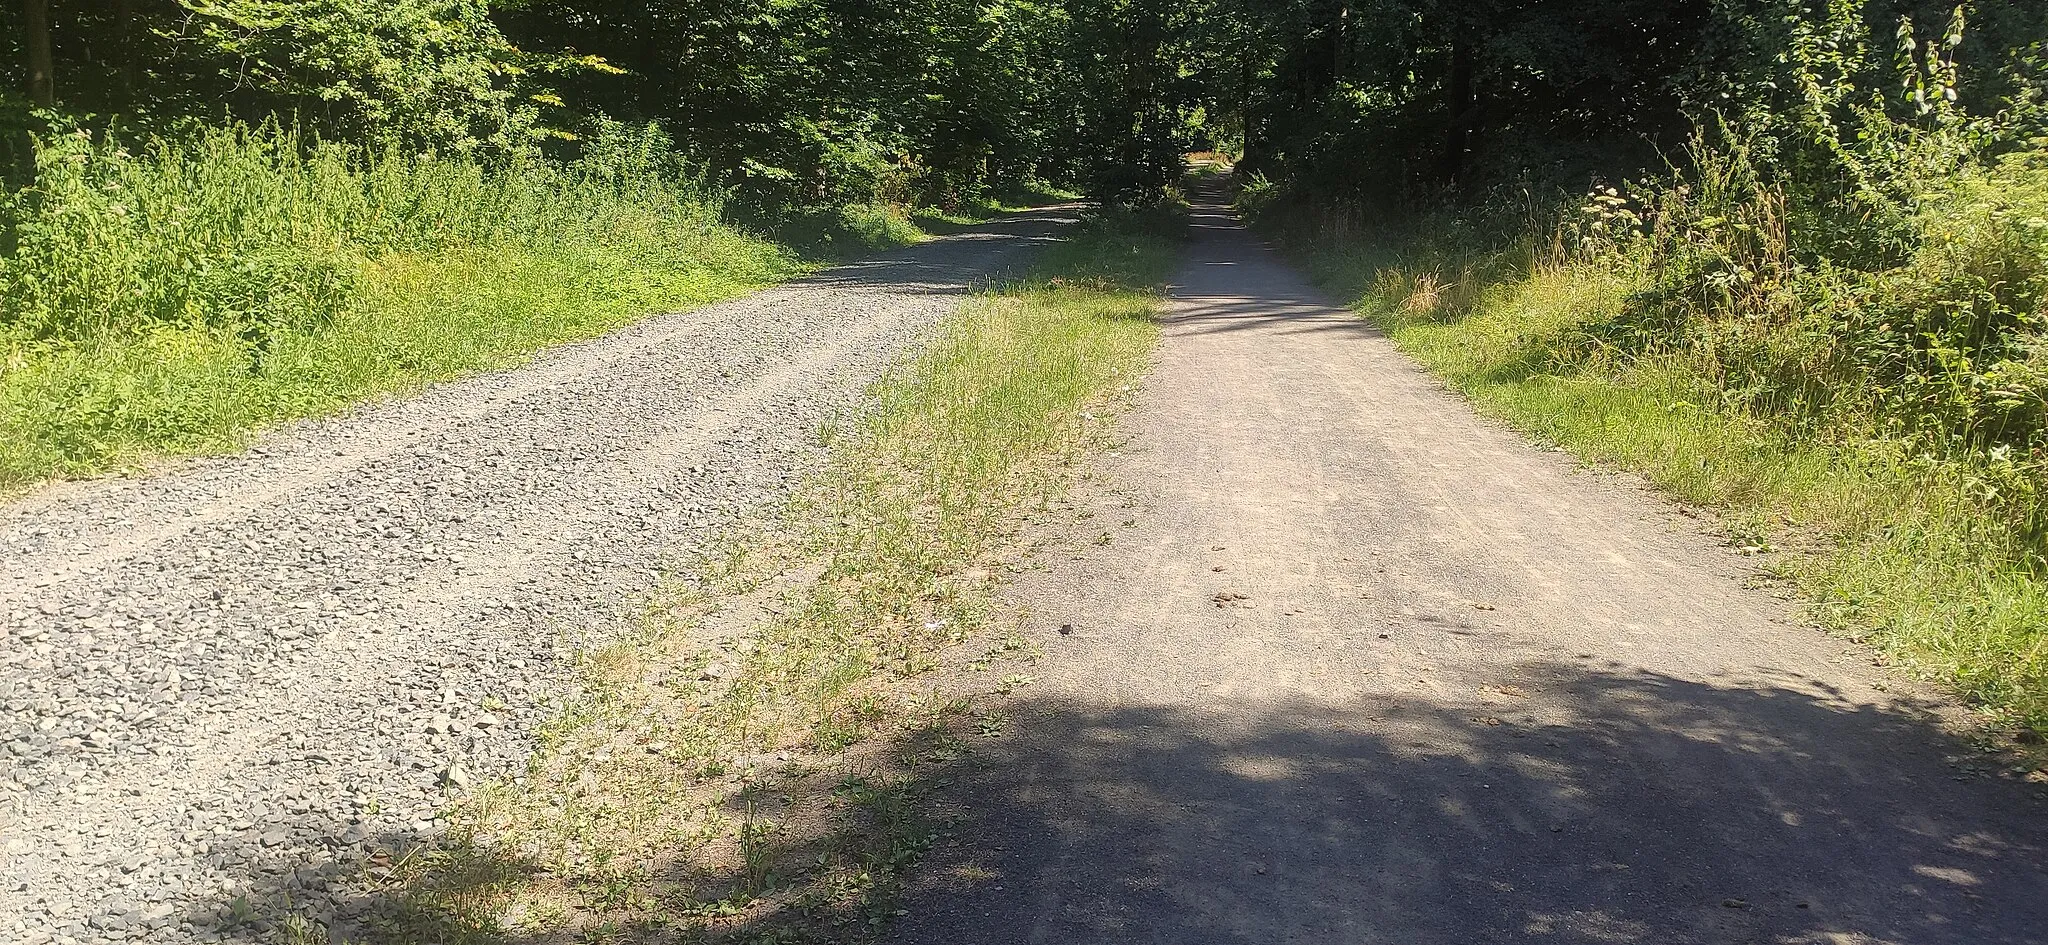 Photo showing: two gravel roads next to each other, one with coarse stones and the other with very fine gravel